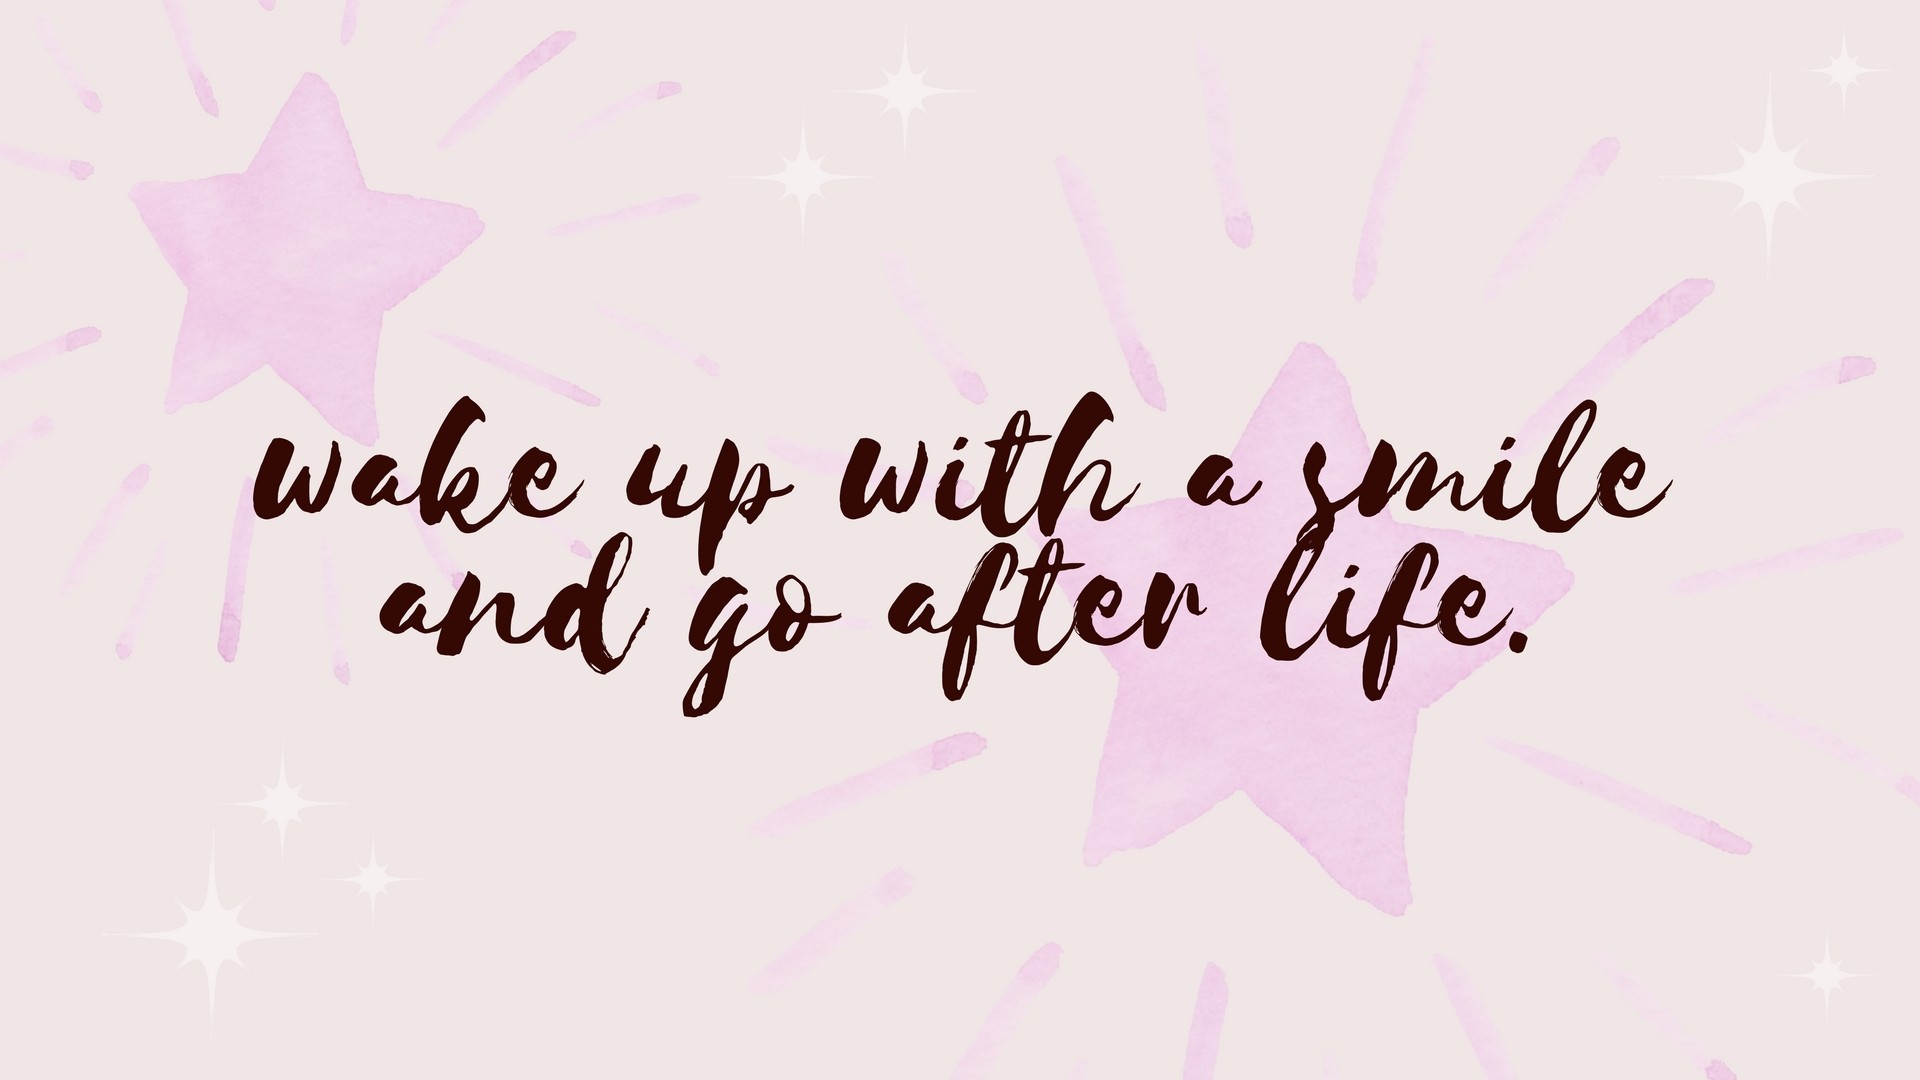 1920x1080 wake up with a smile and go after life desktop wallpaper